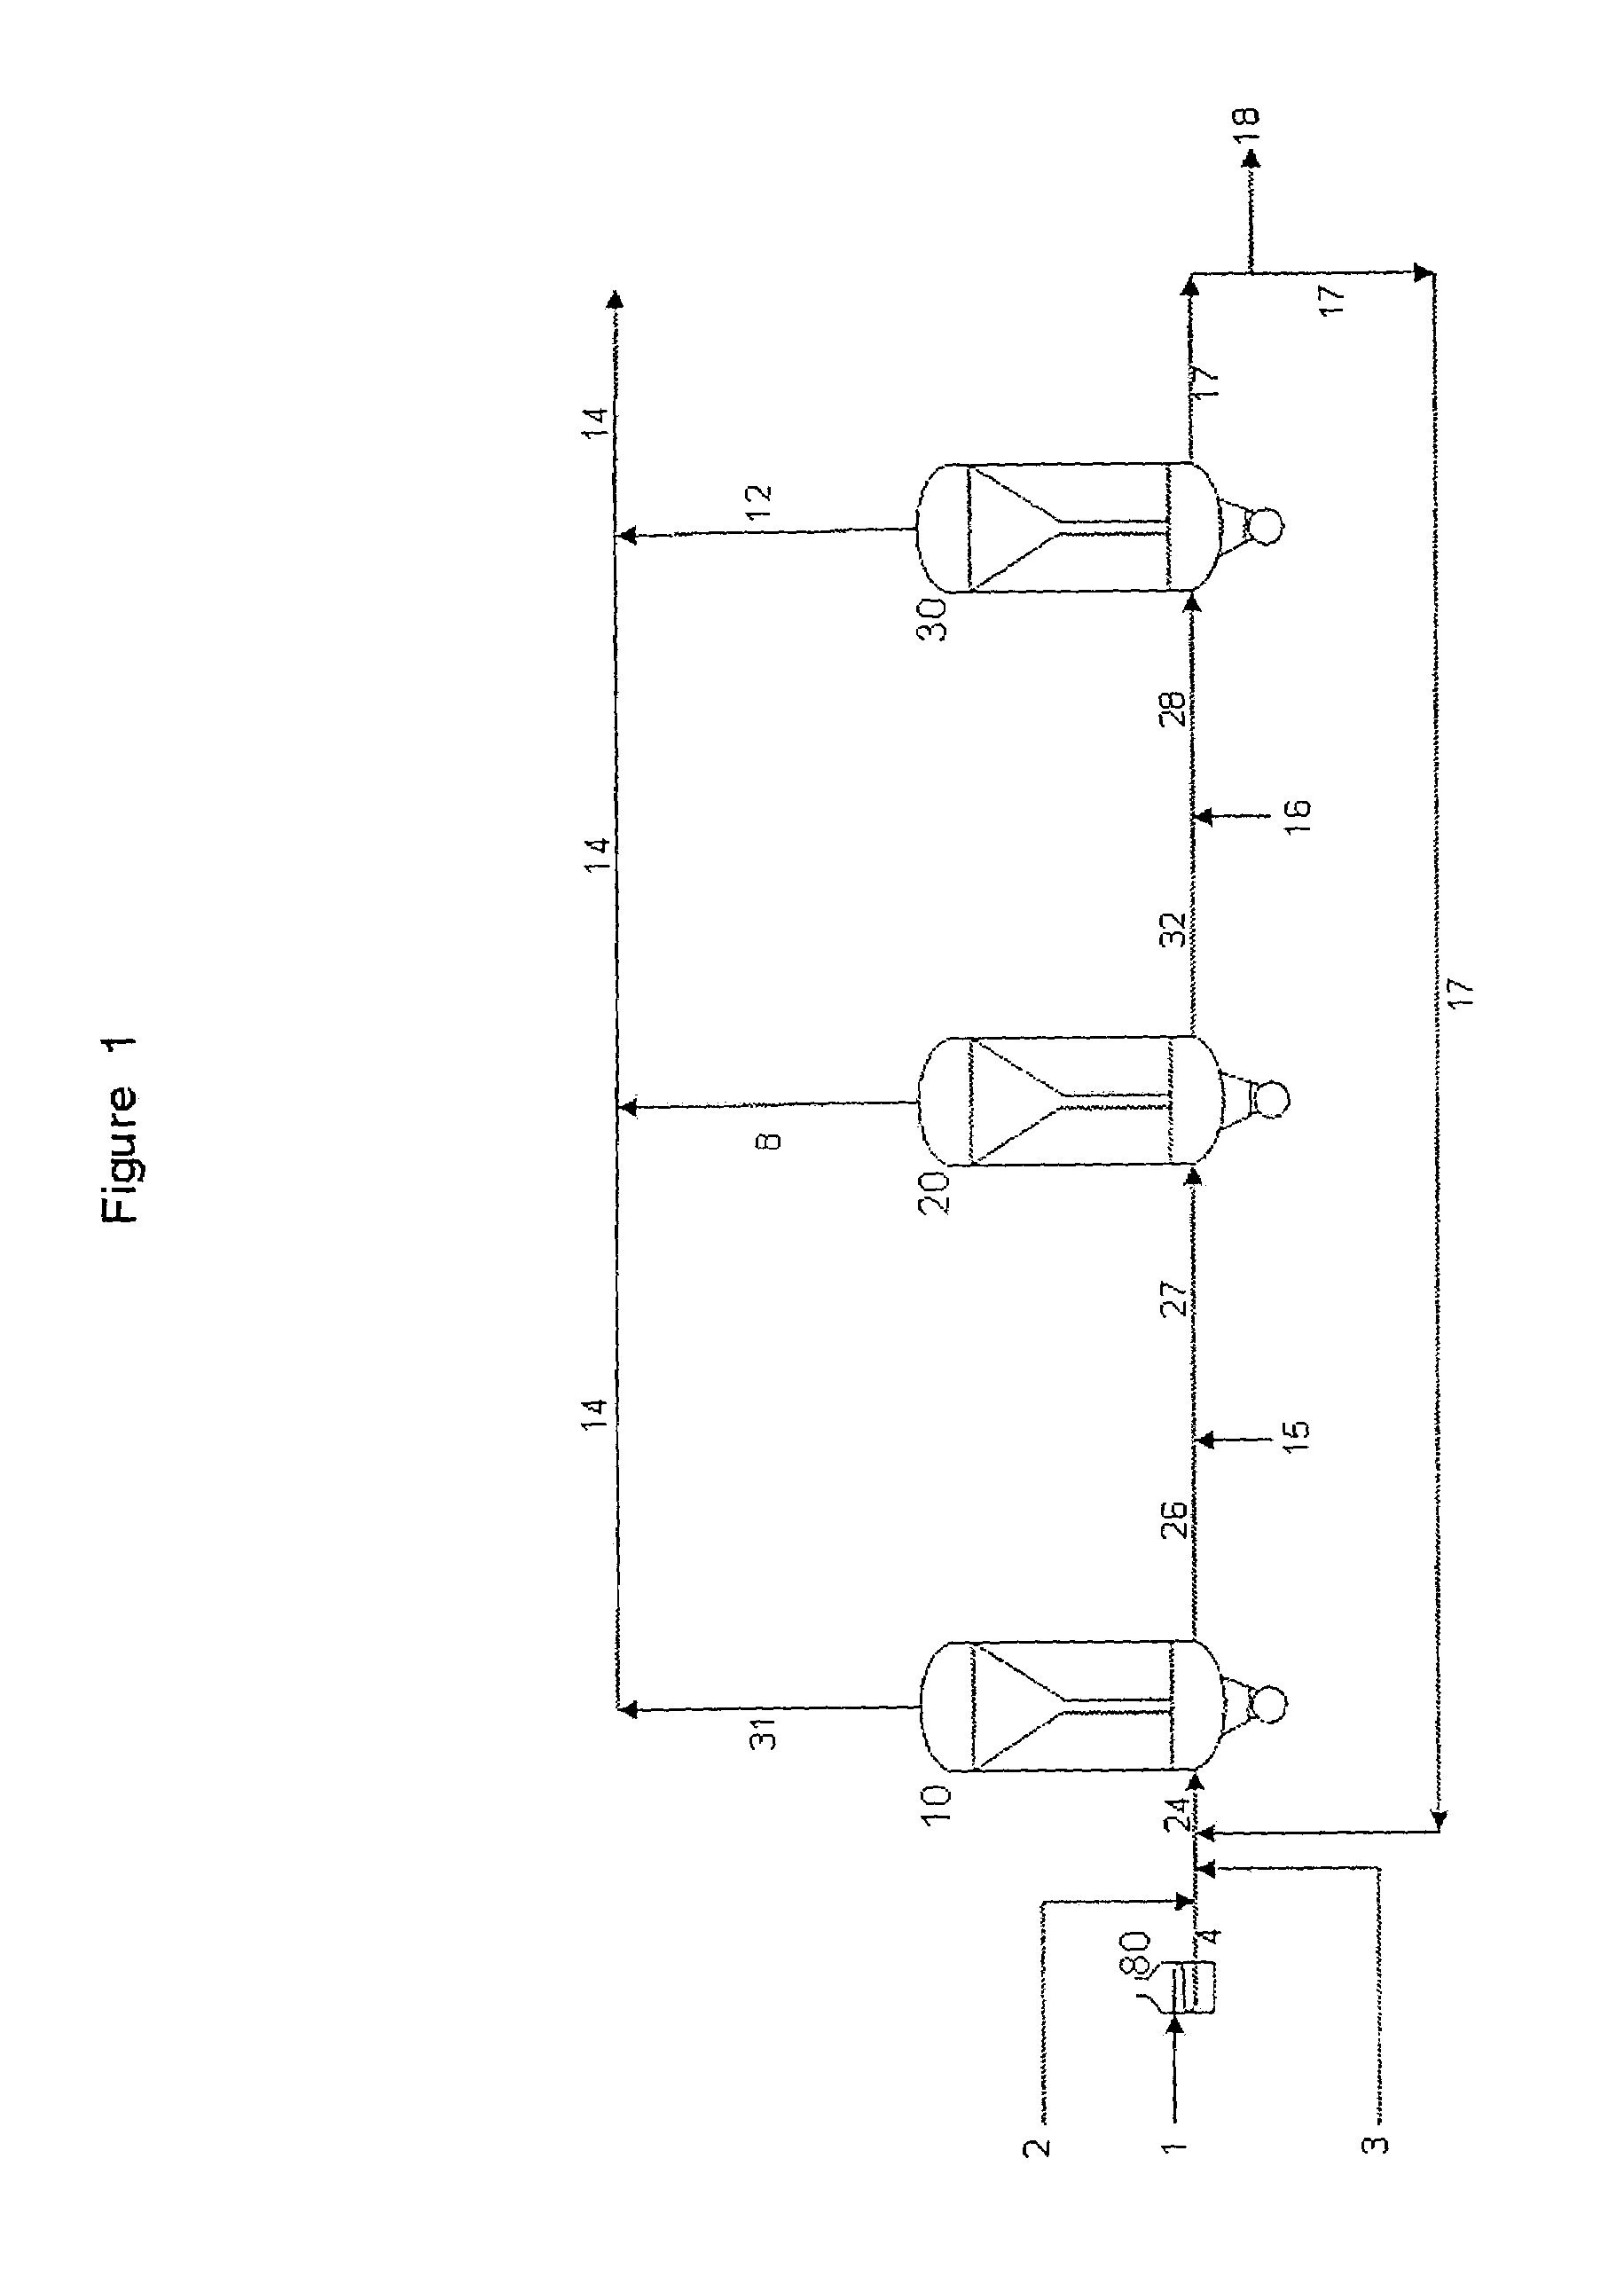 Process for upgrading heavy oil using a reactor with a novel reactor separation system